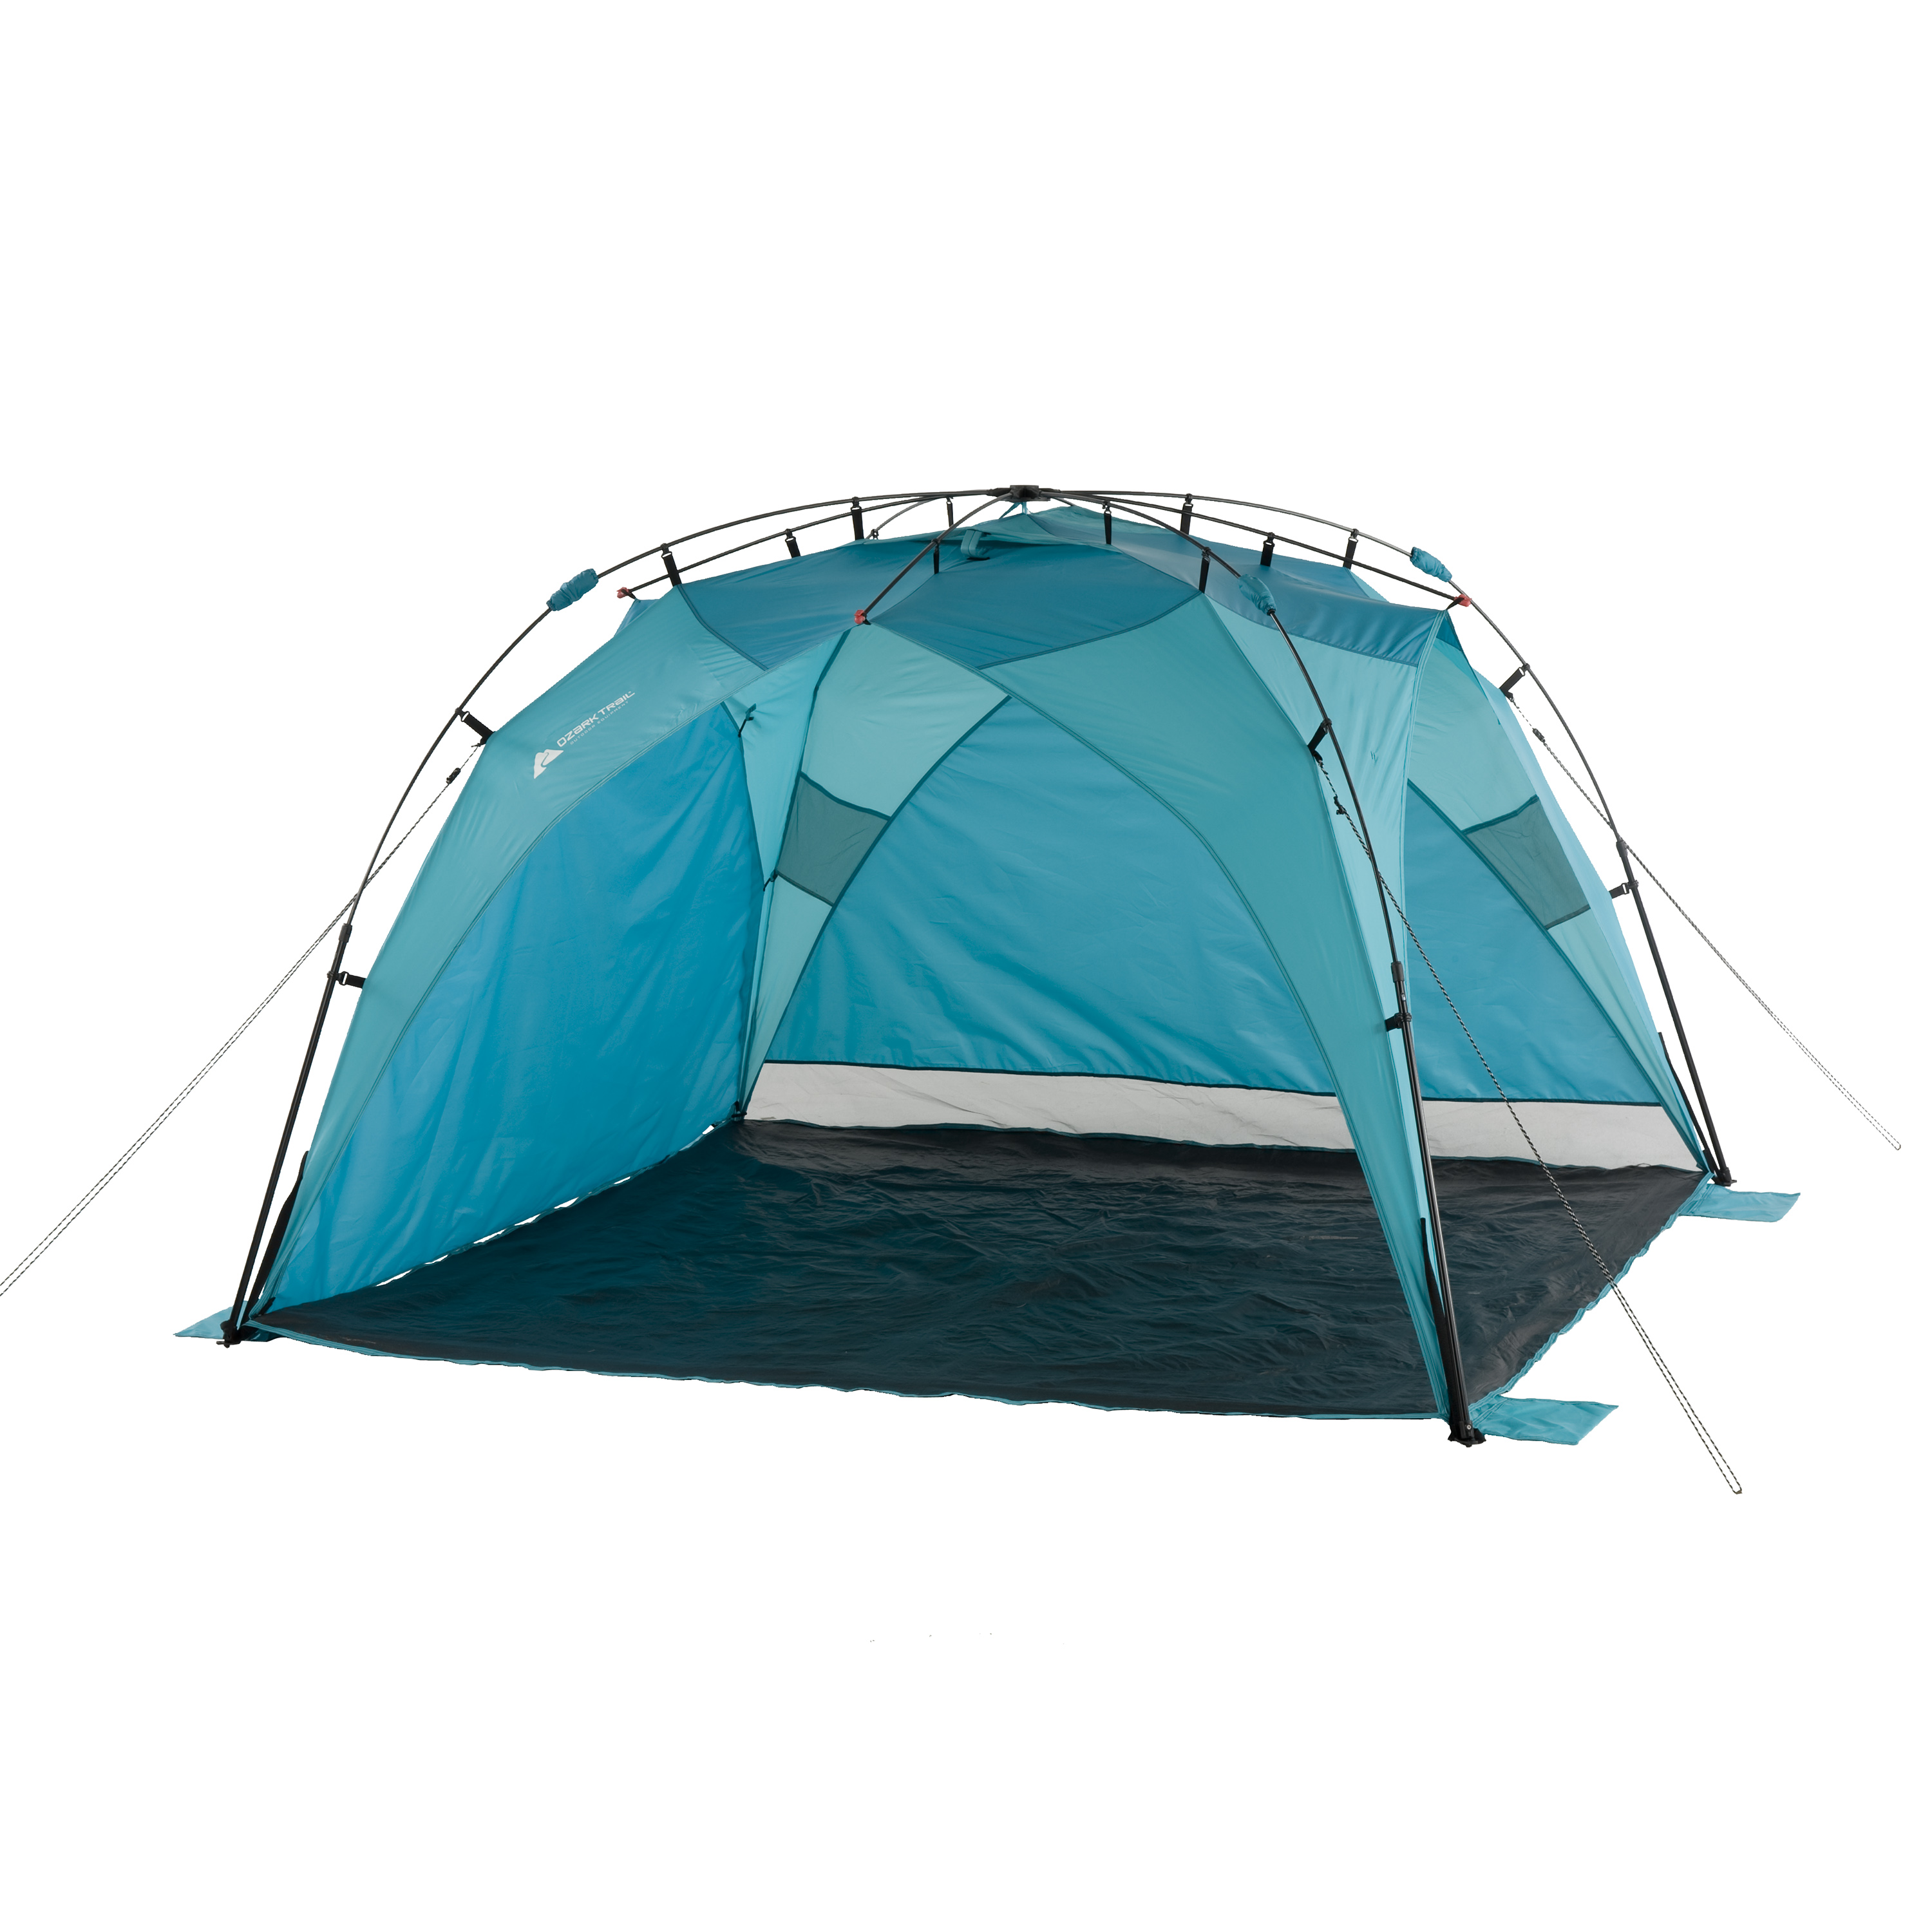 Ozark Trail 8' x 8' Instant Sun Shade (64 Square feet Coverage) - image 1 of 5